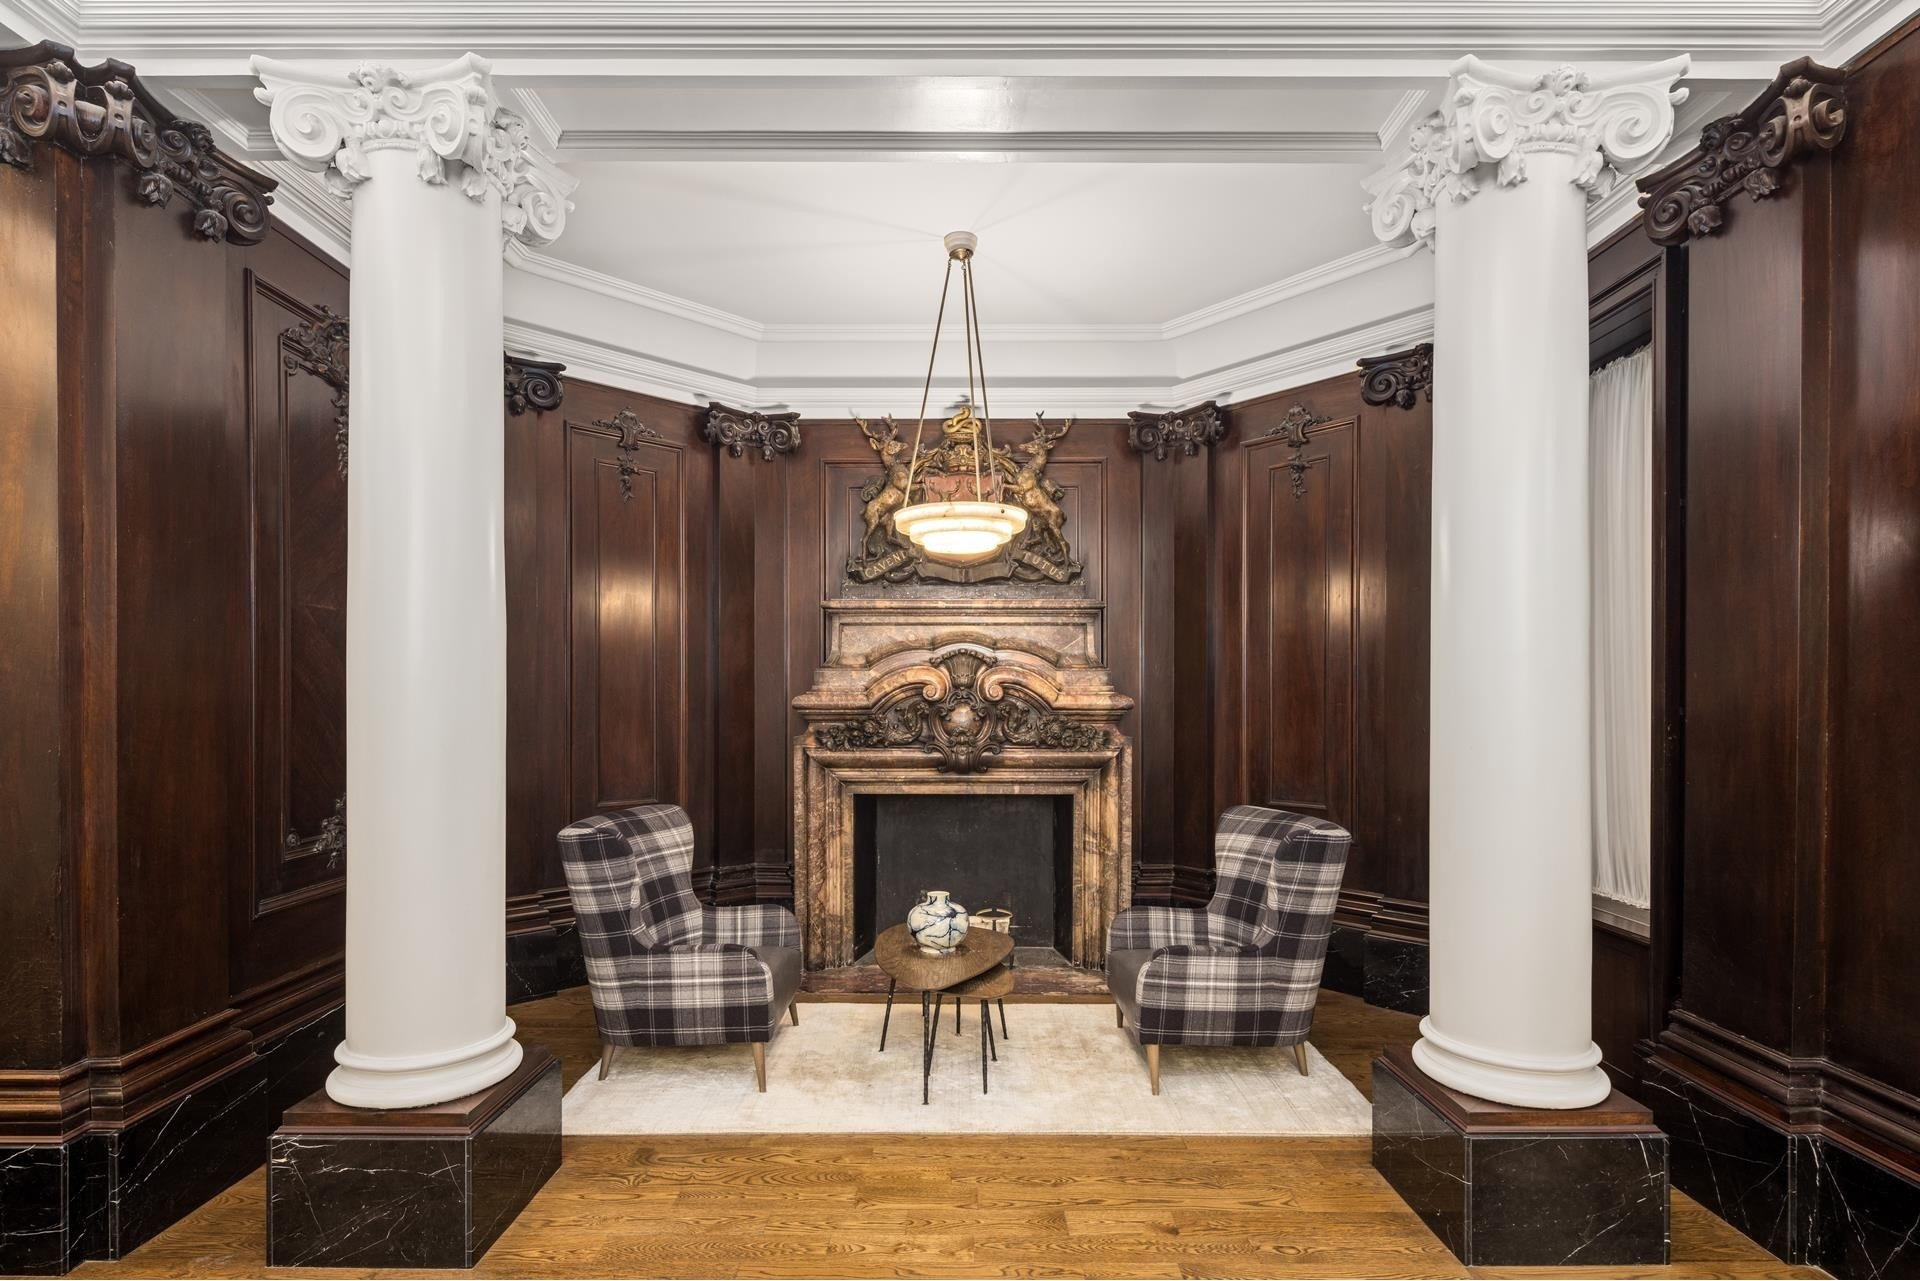 Co-op Properties for Sale at The Chatsworth, 344 W 72ND ST, 1106 Lincoln Square, New York, New York 10023